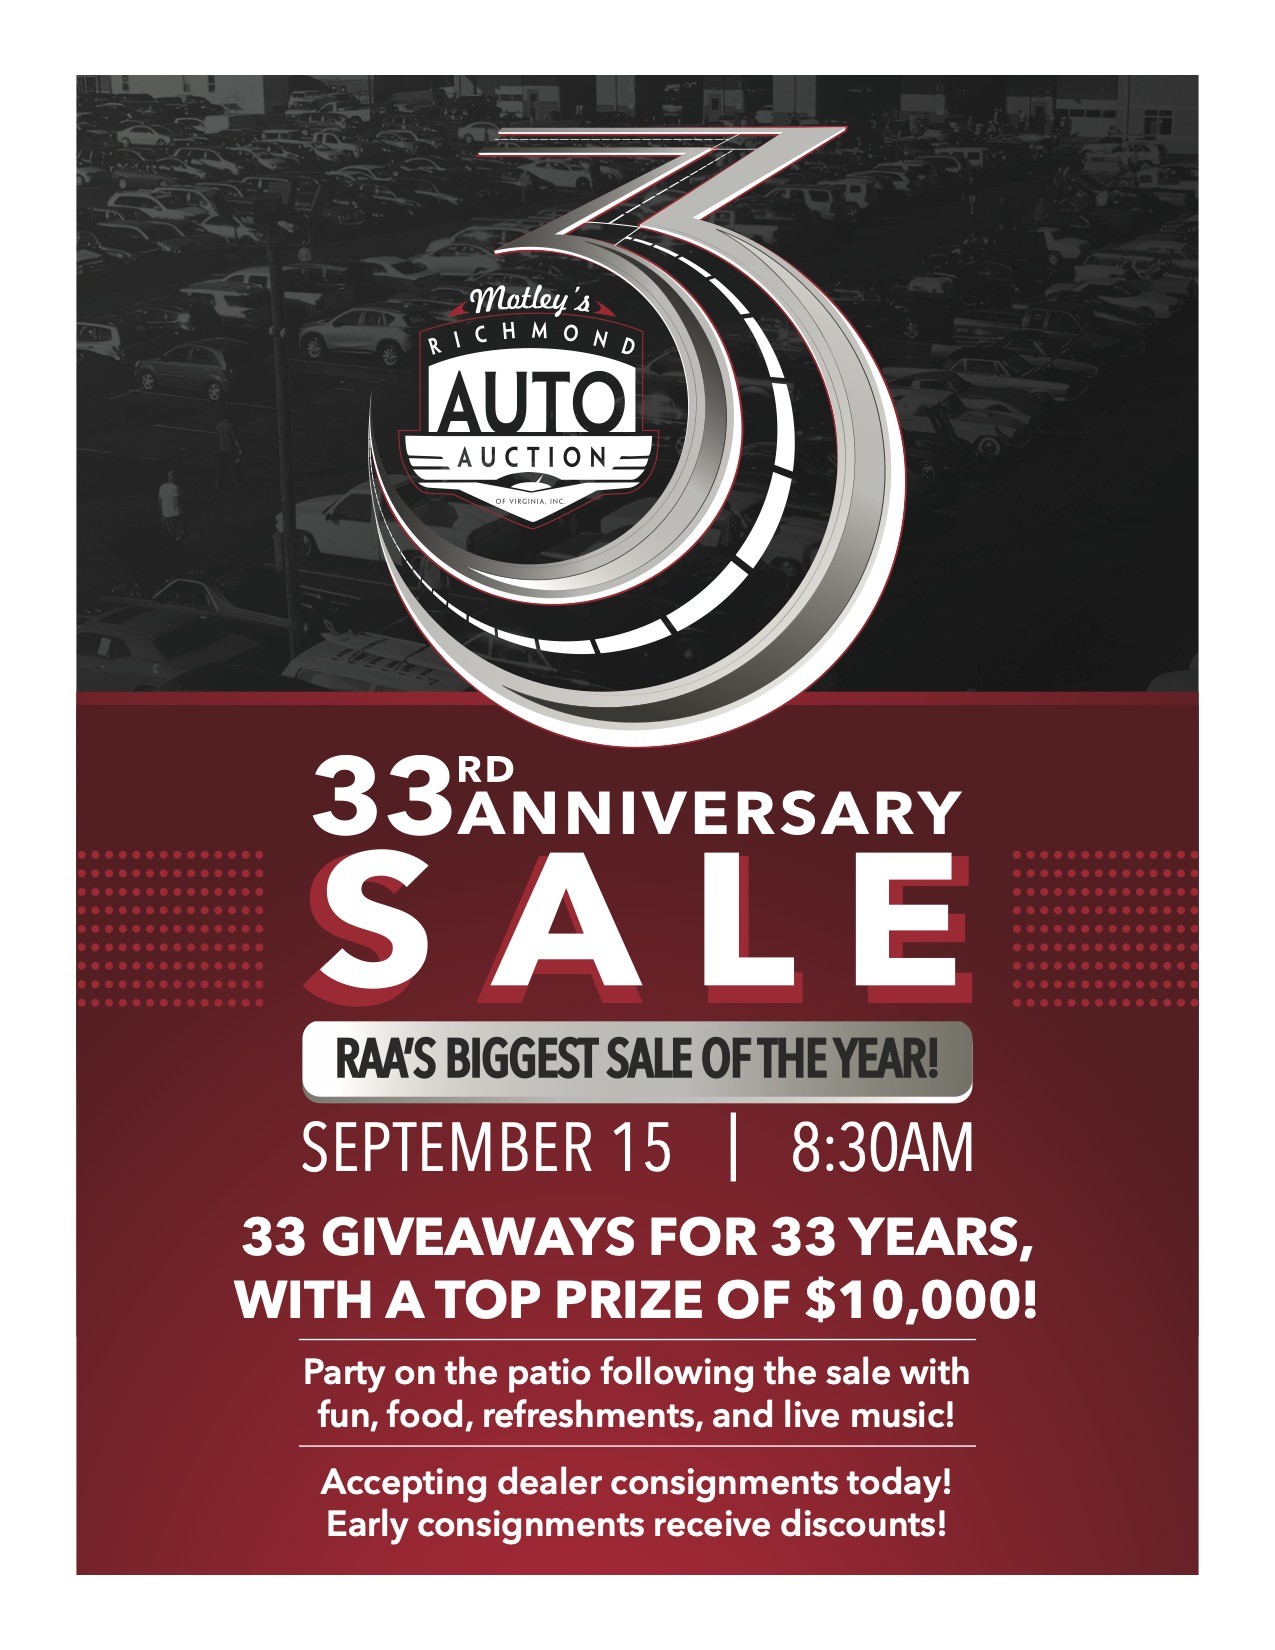 Image for Richmond Auto Auction Specialty Events